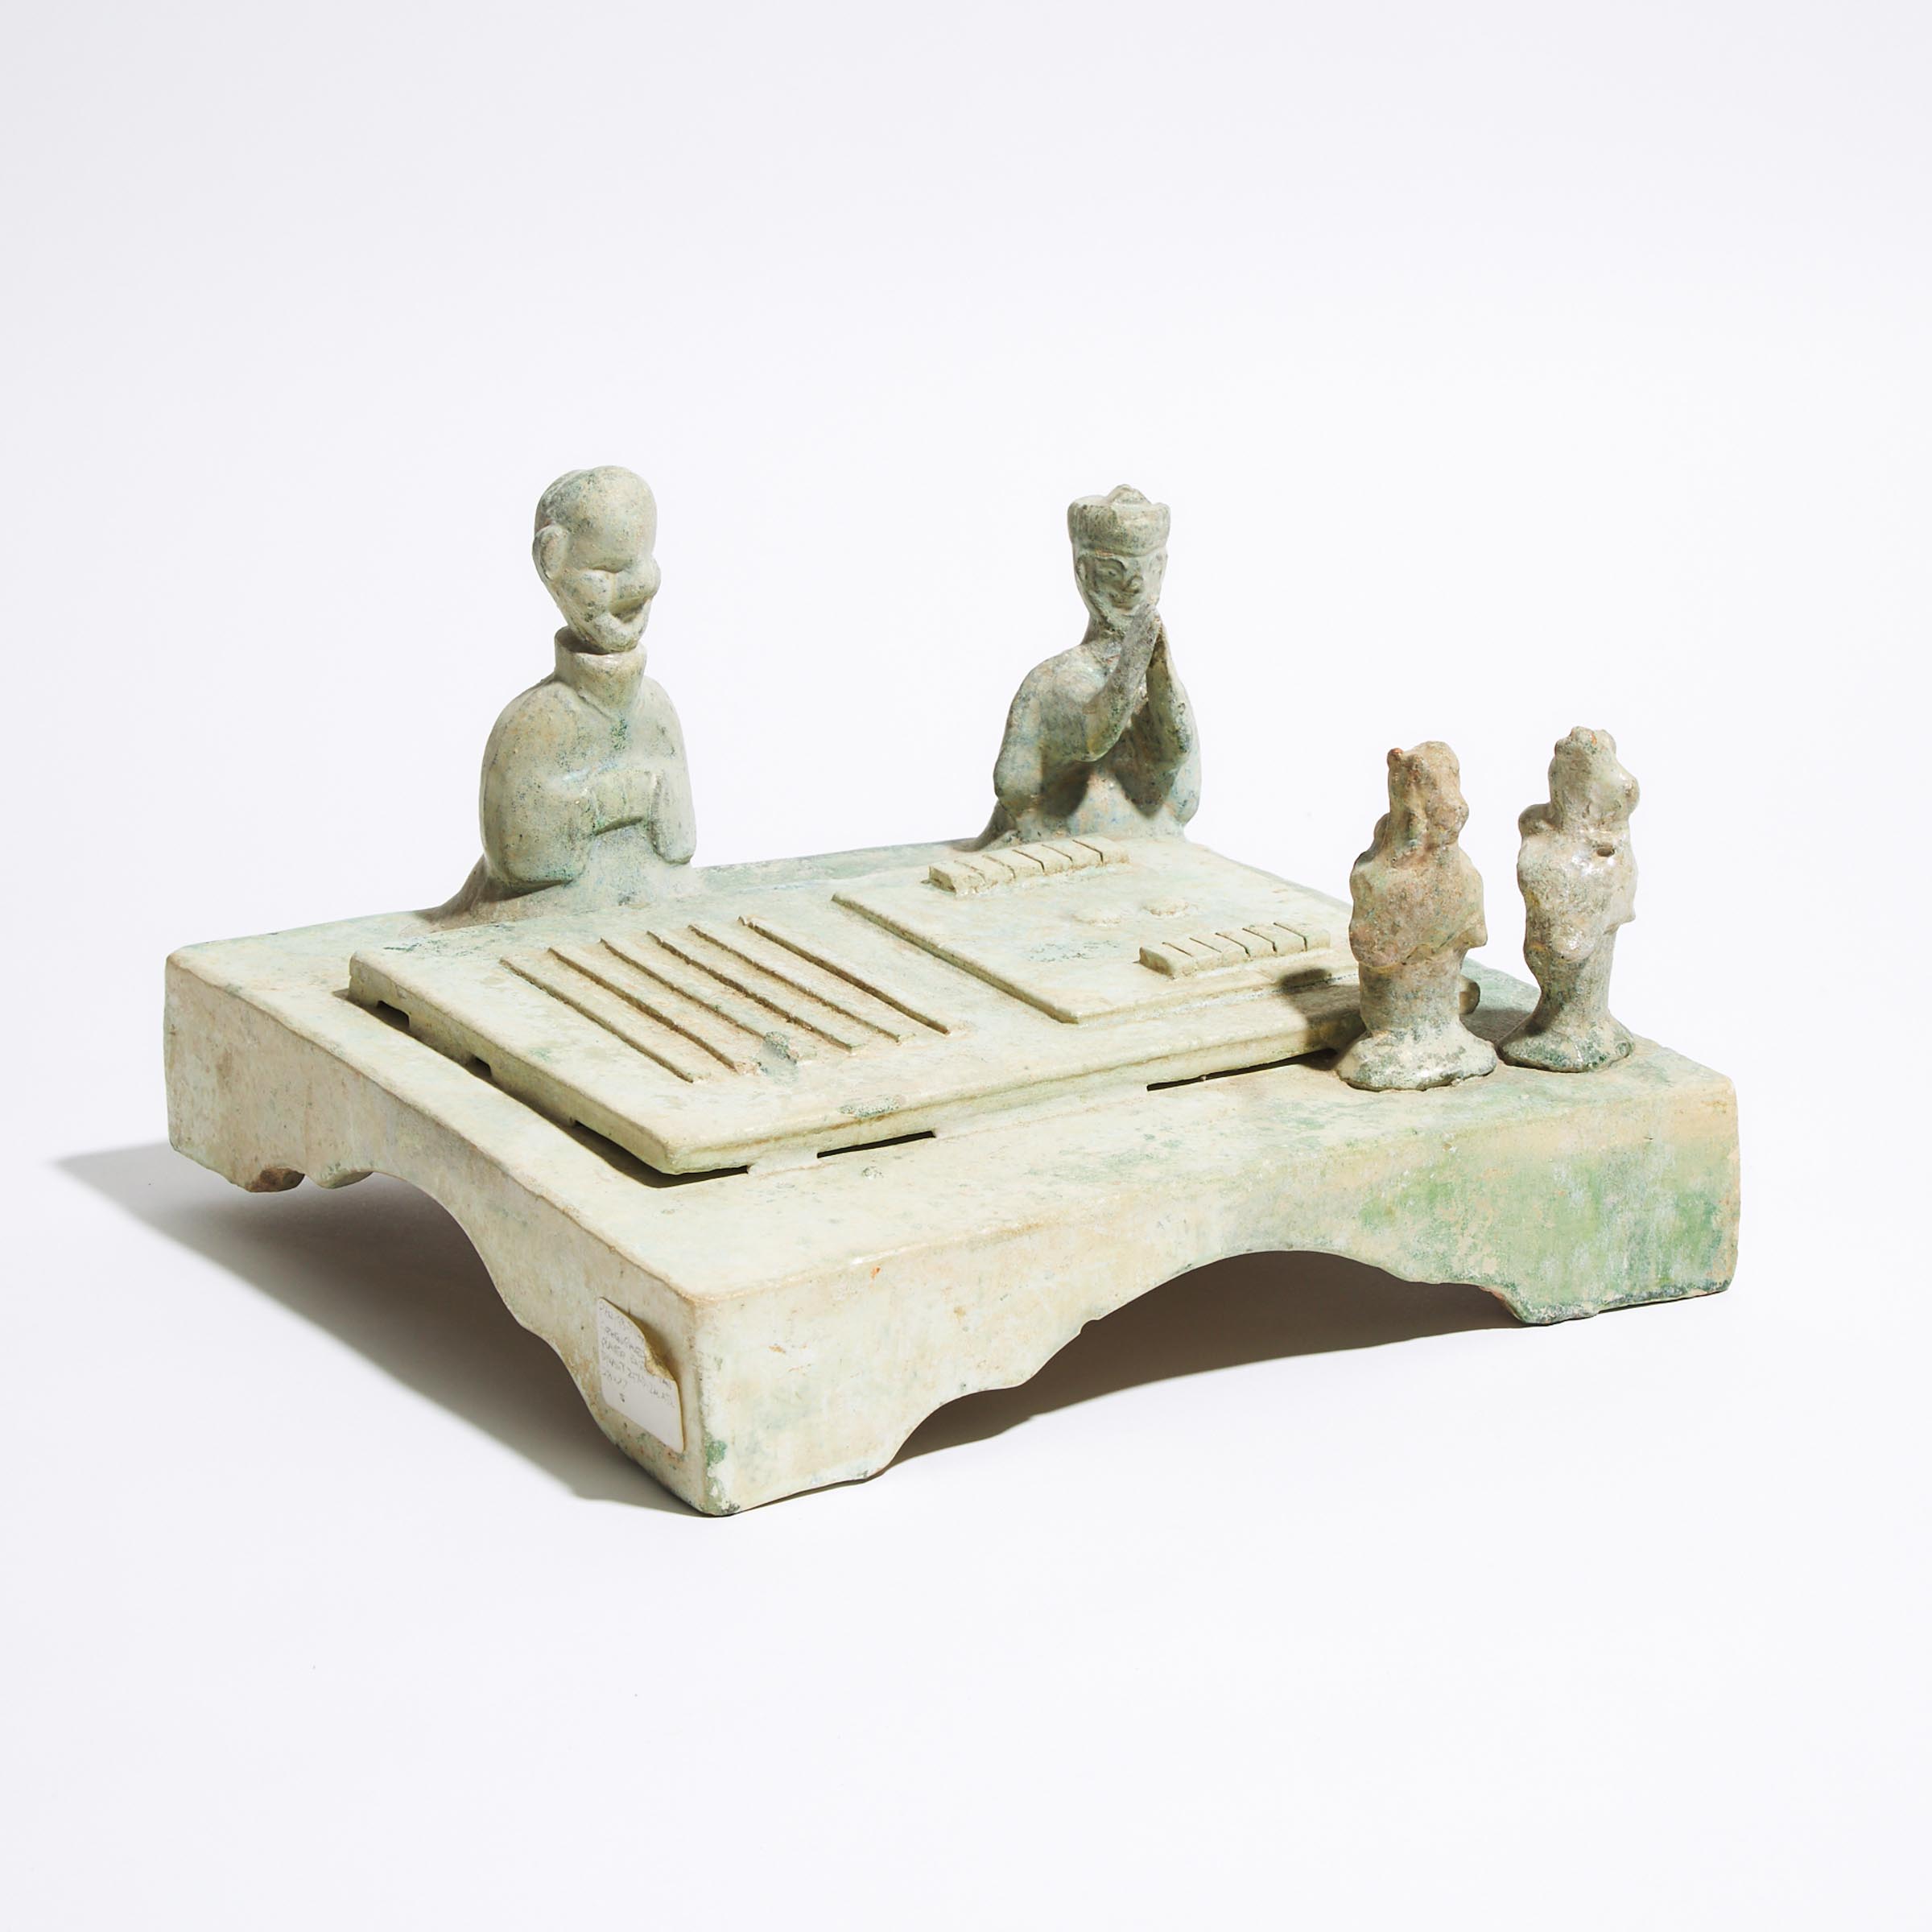 A Green-Glazed Model of a Games Table, Han Dynasty (206 BC - AD 220)